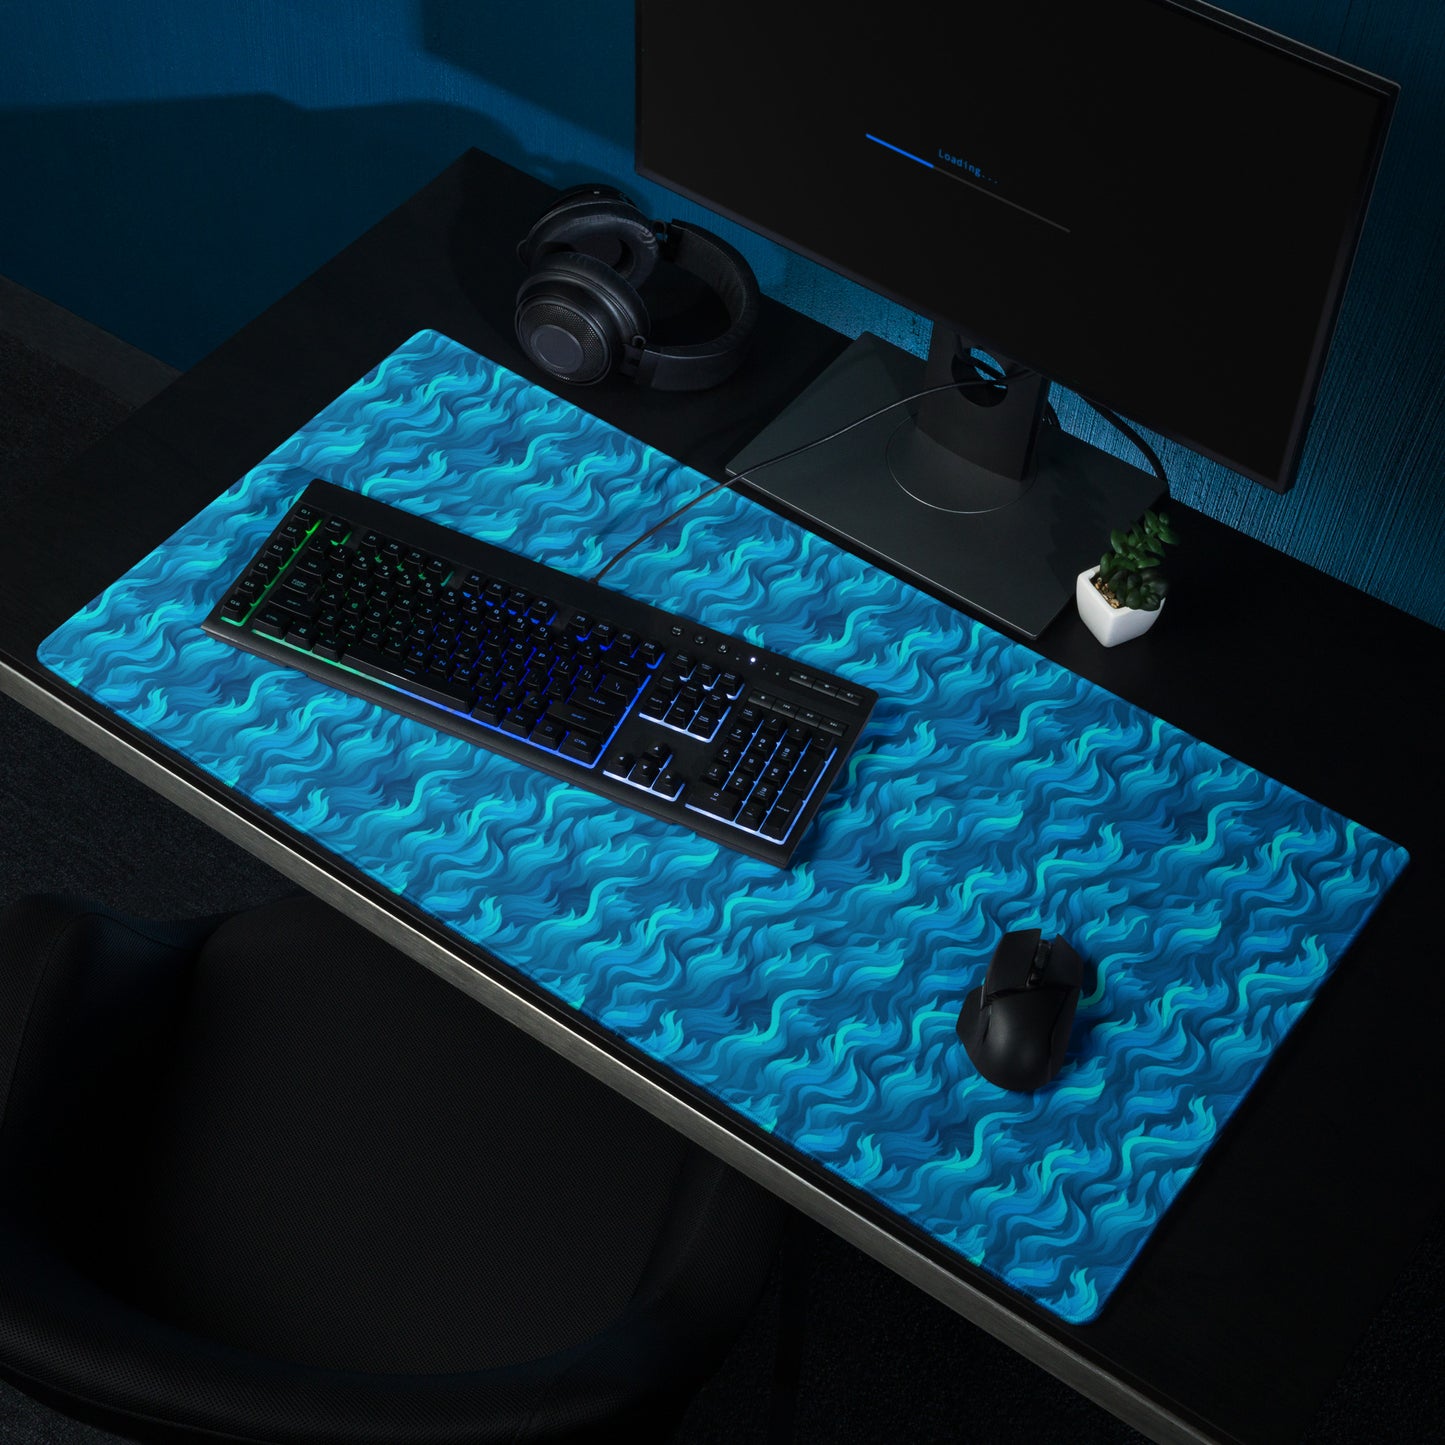 A 36" x 18" desk pad with a wavy flame pattern on it shown on a desk. Blue in color.